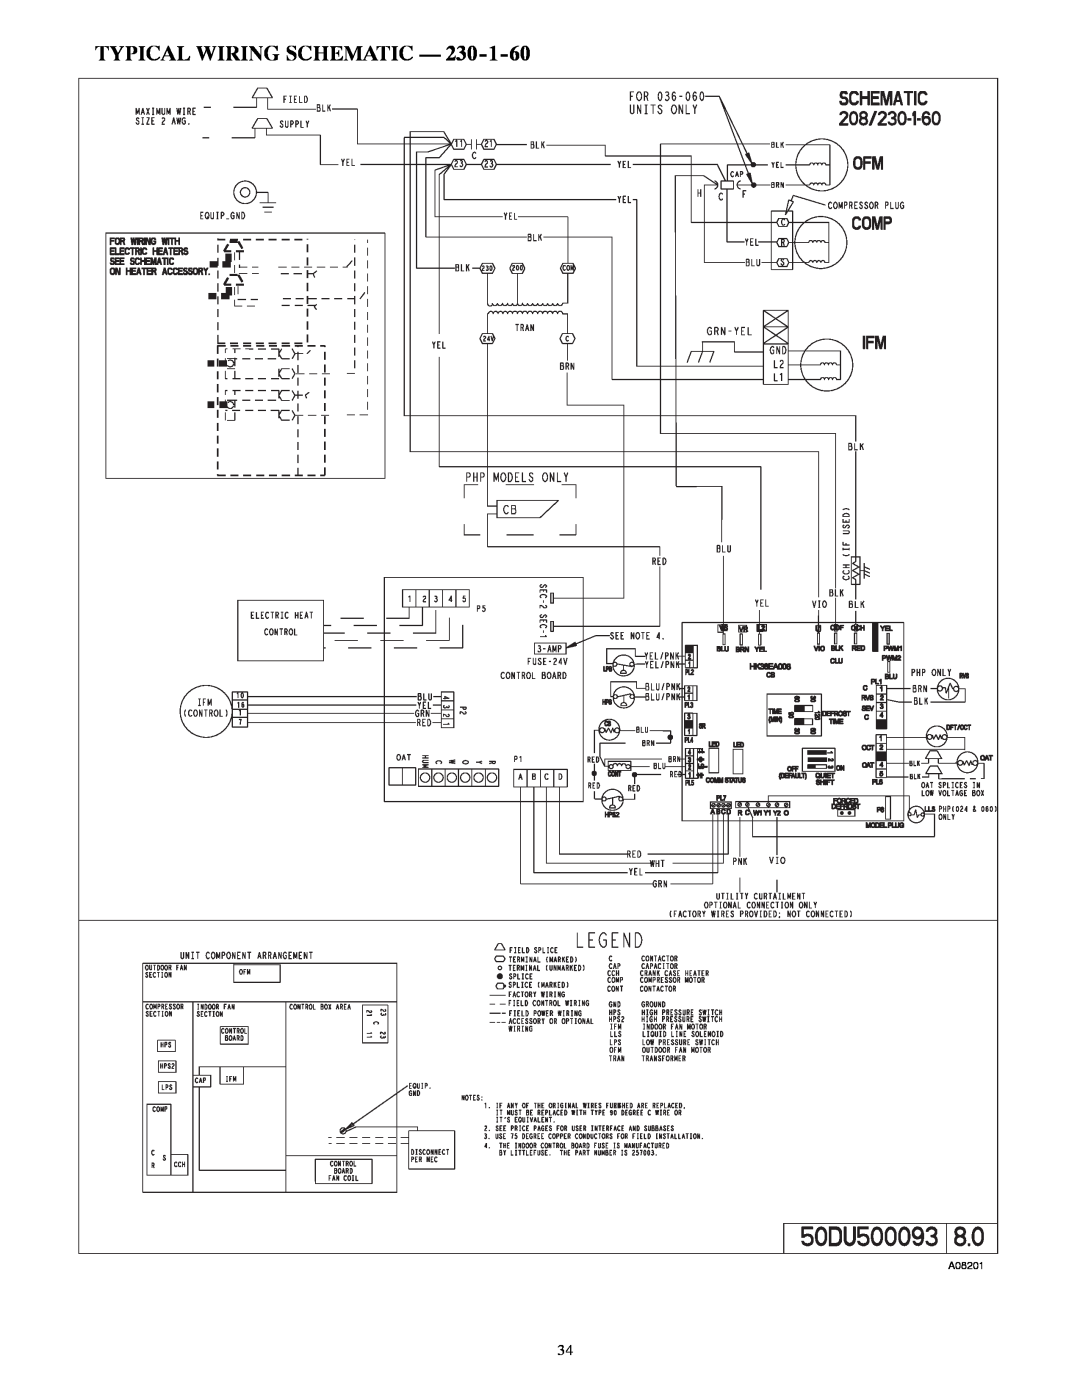 Carrier 50XT manual Typical Wiring Schematic, A08201 